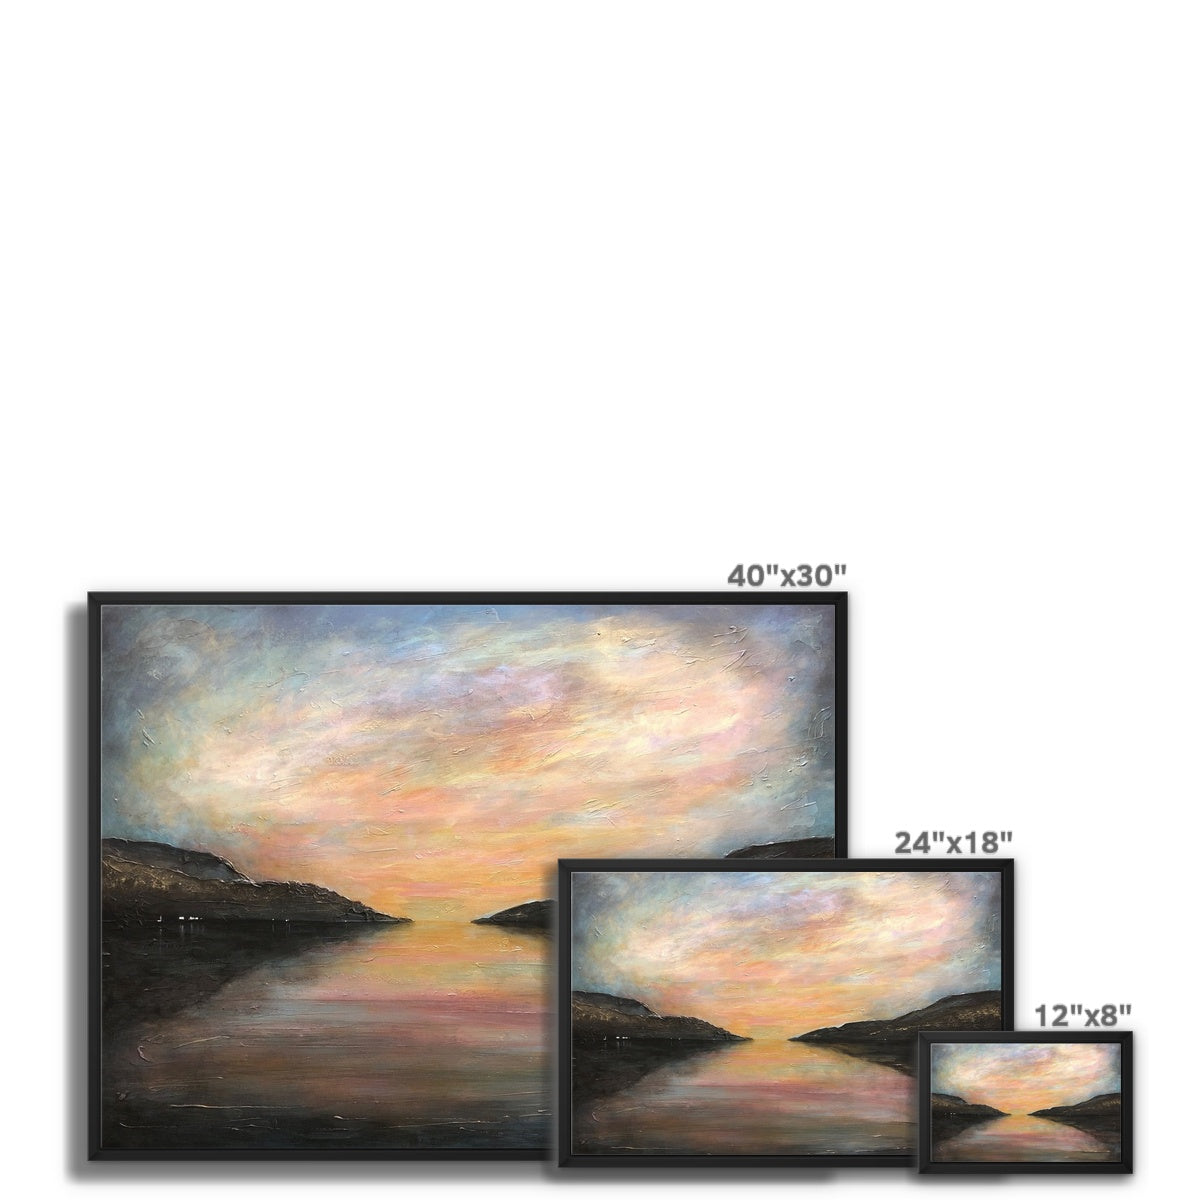 Loch Ness Glow Painting | Framed Canvas From Scotland-Floating Framed Canvas Prints-Scottish Lochs & Mountains Art Gallery-Paintings, Prints, Homeware, Art Gifts From Scotland By Scottish Artist Kevin Hunter